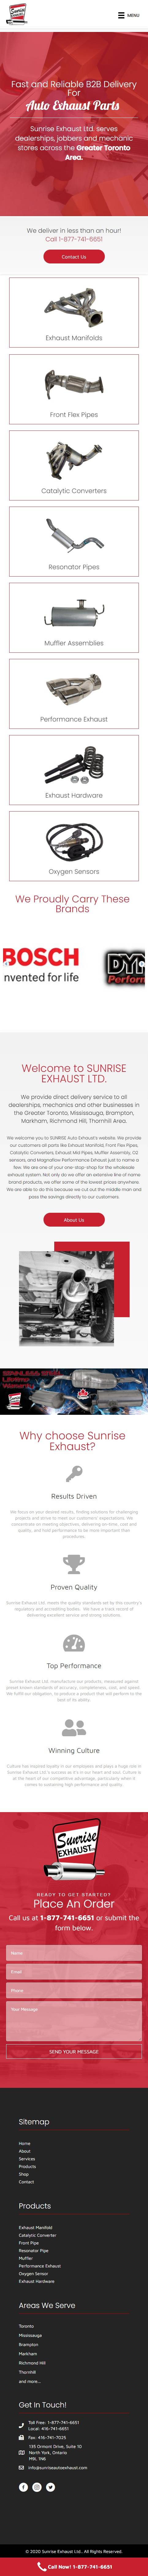 mobile view of web design project for car parts dealer in North York Ontario